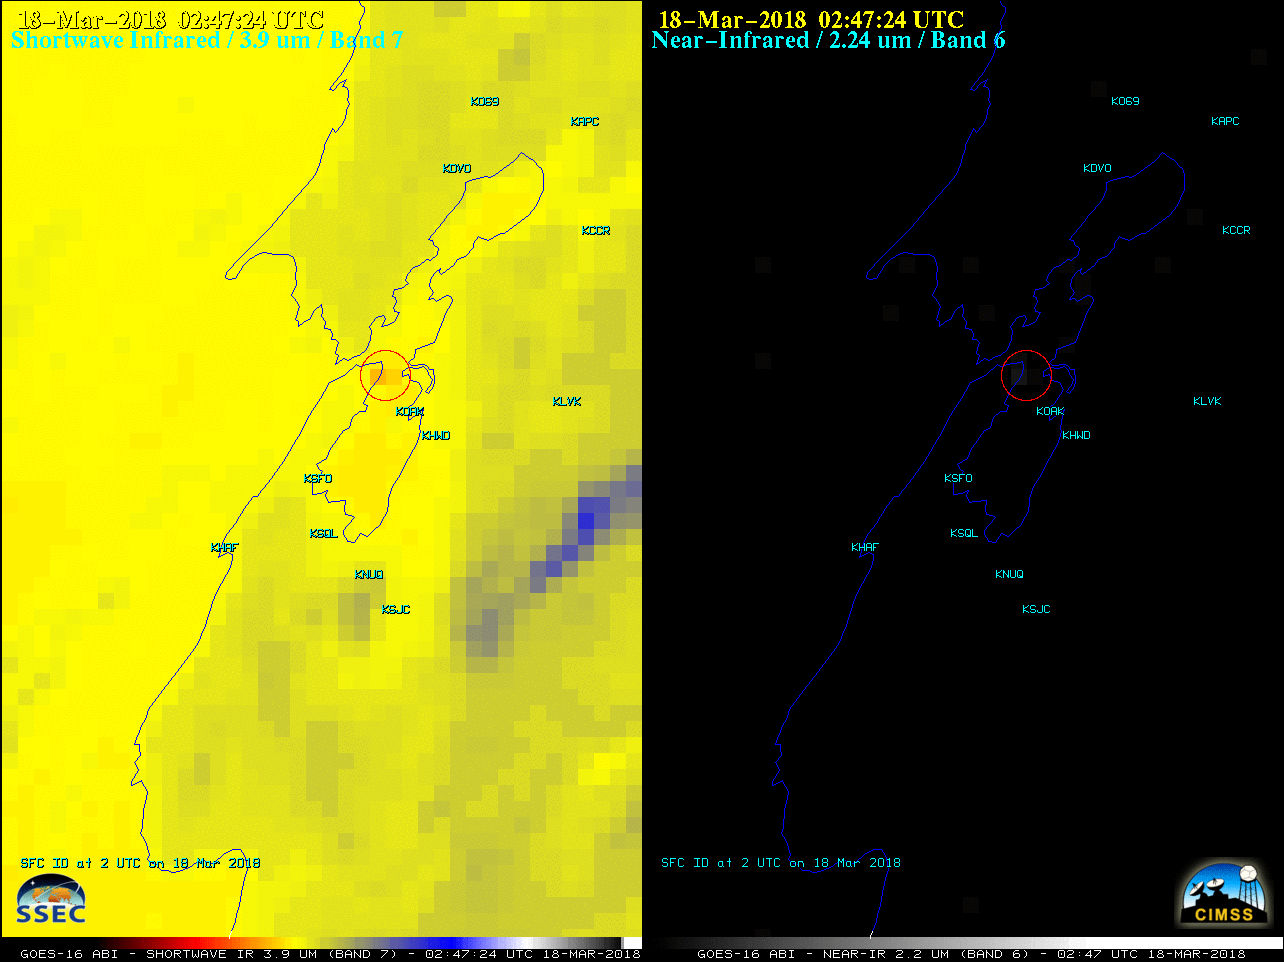 GOES-16 Shortwave Infrared (3.9 µm, left) and Near-Infrared (2.24 µm, right) images, with station identifiers plotted in cyan [click to play animation]